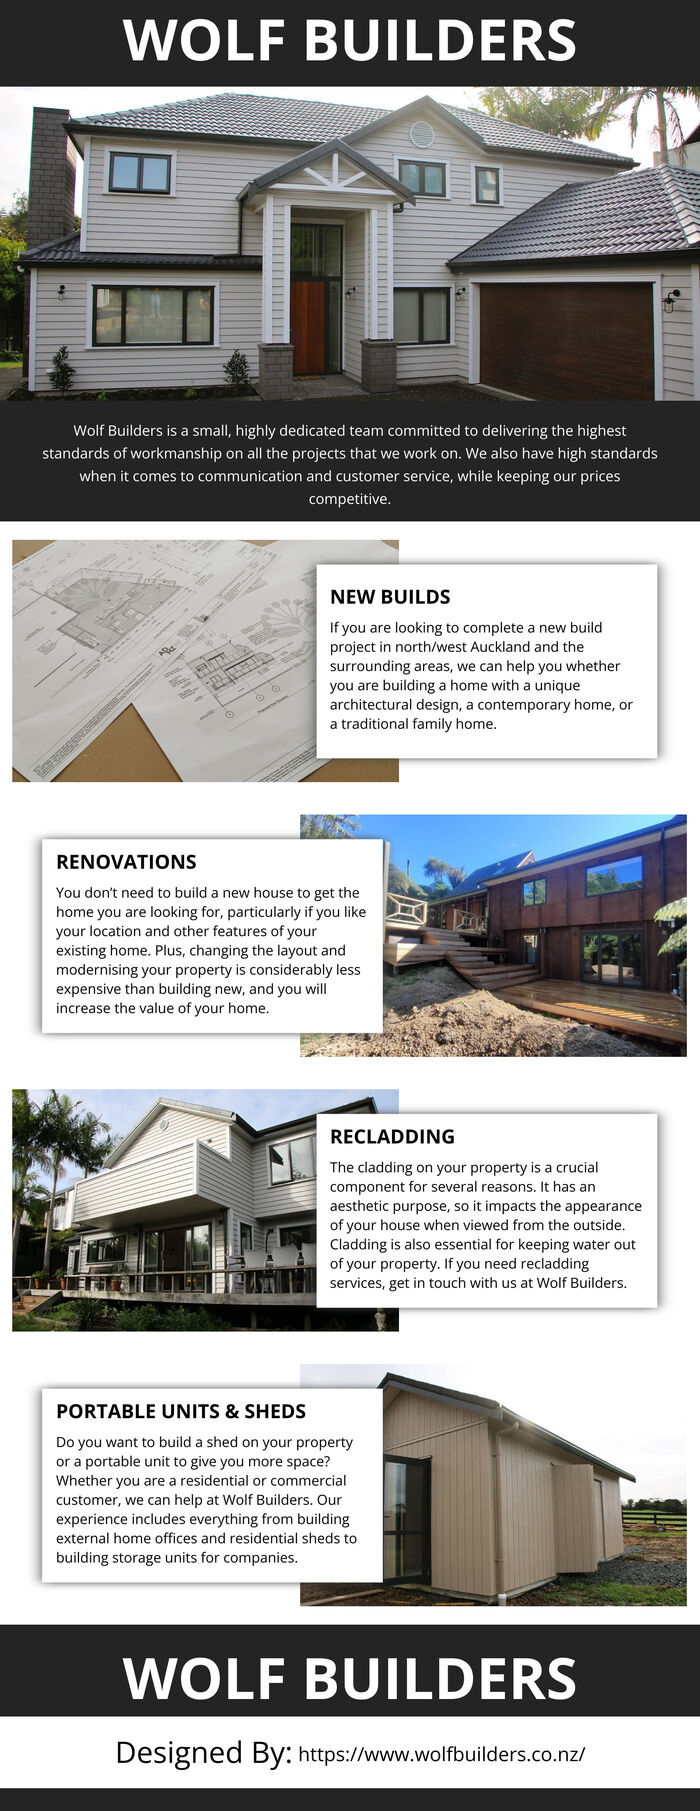 This Infographic is Designed by Wolf Builders Limited.